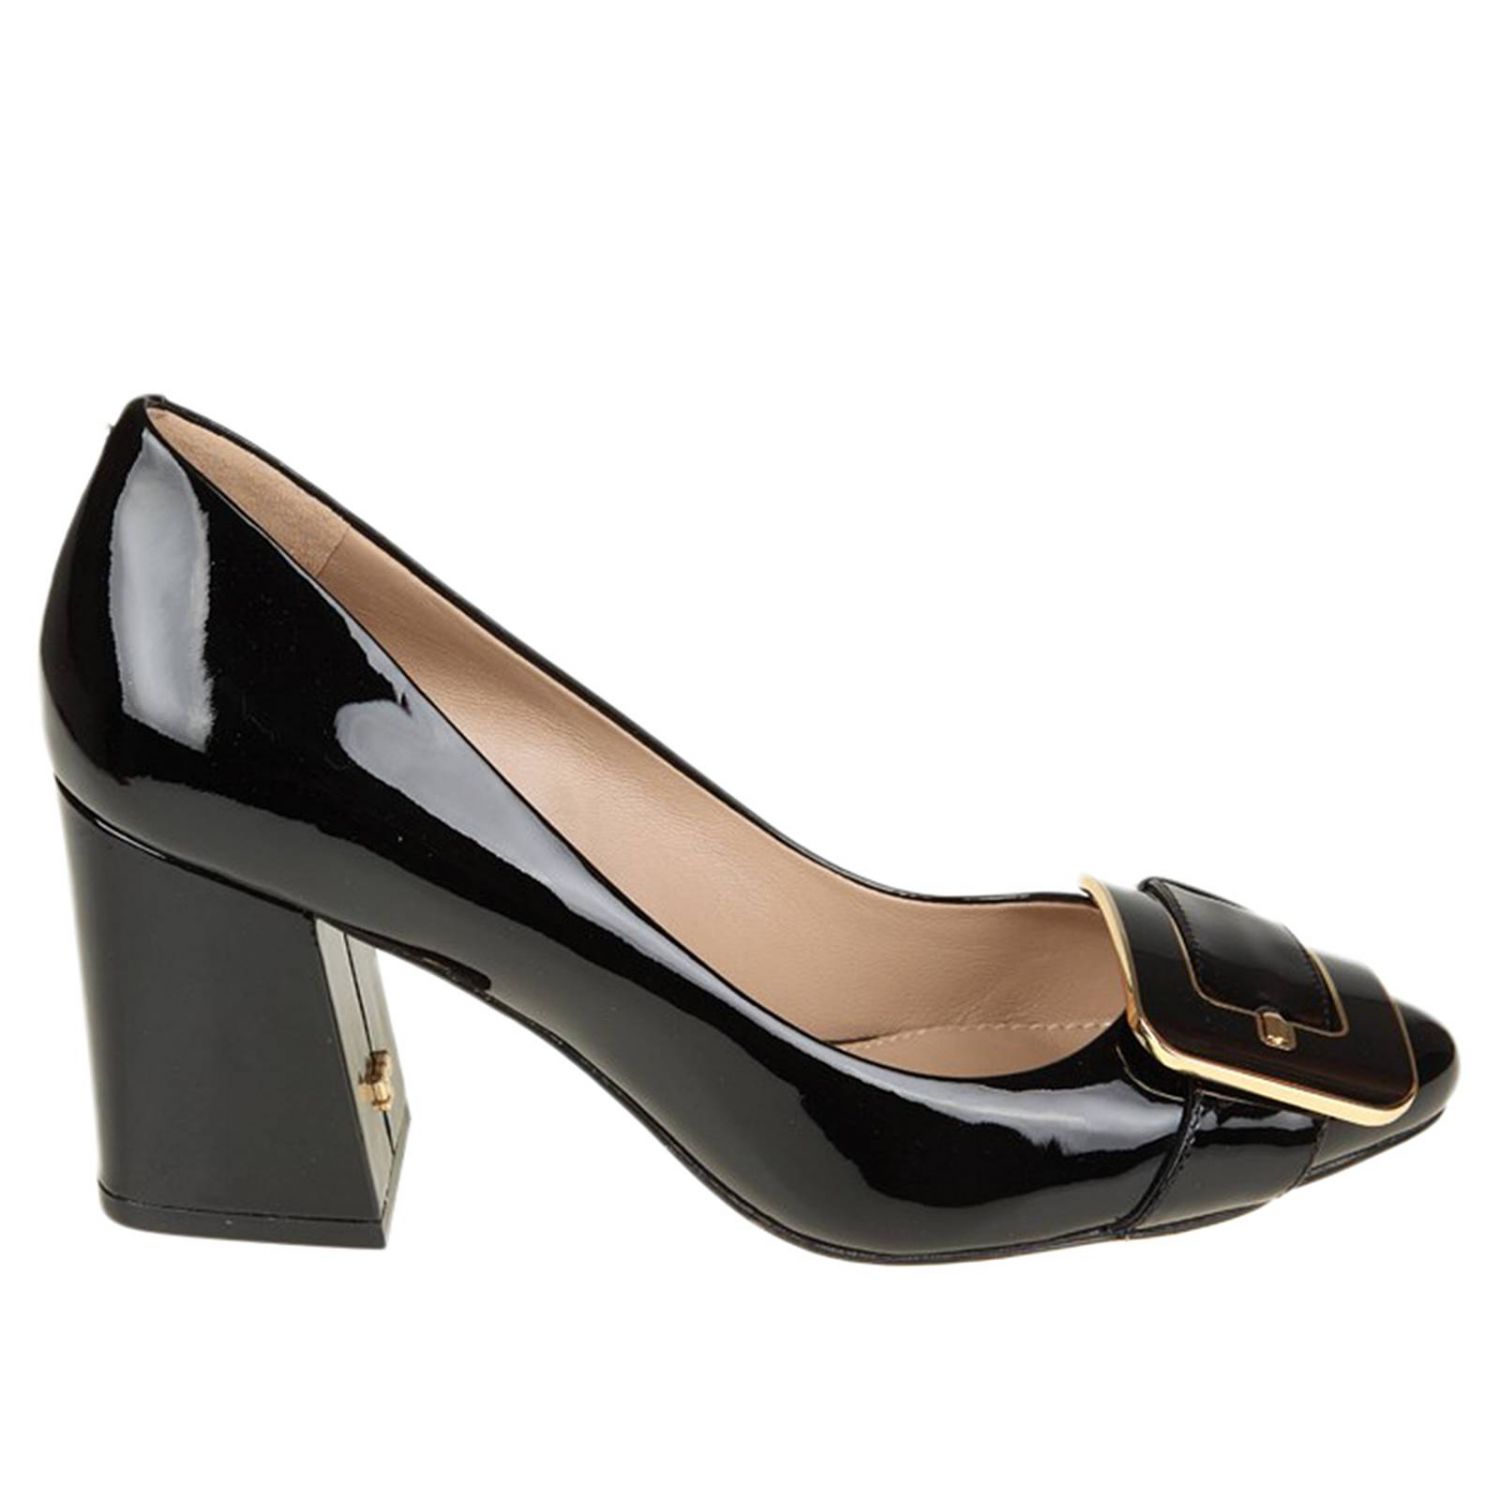 Tory Burch Outlet: Pumps women - Black | Pumps Tory Burch 38039 GIGLIO.COM